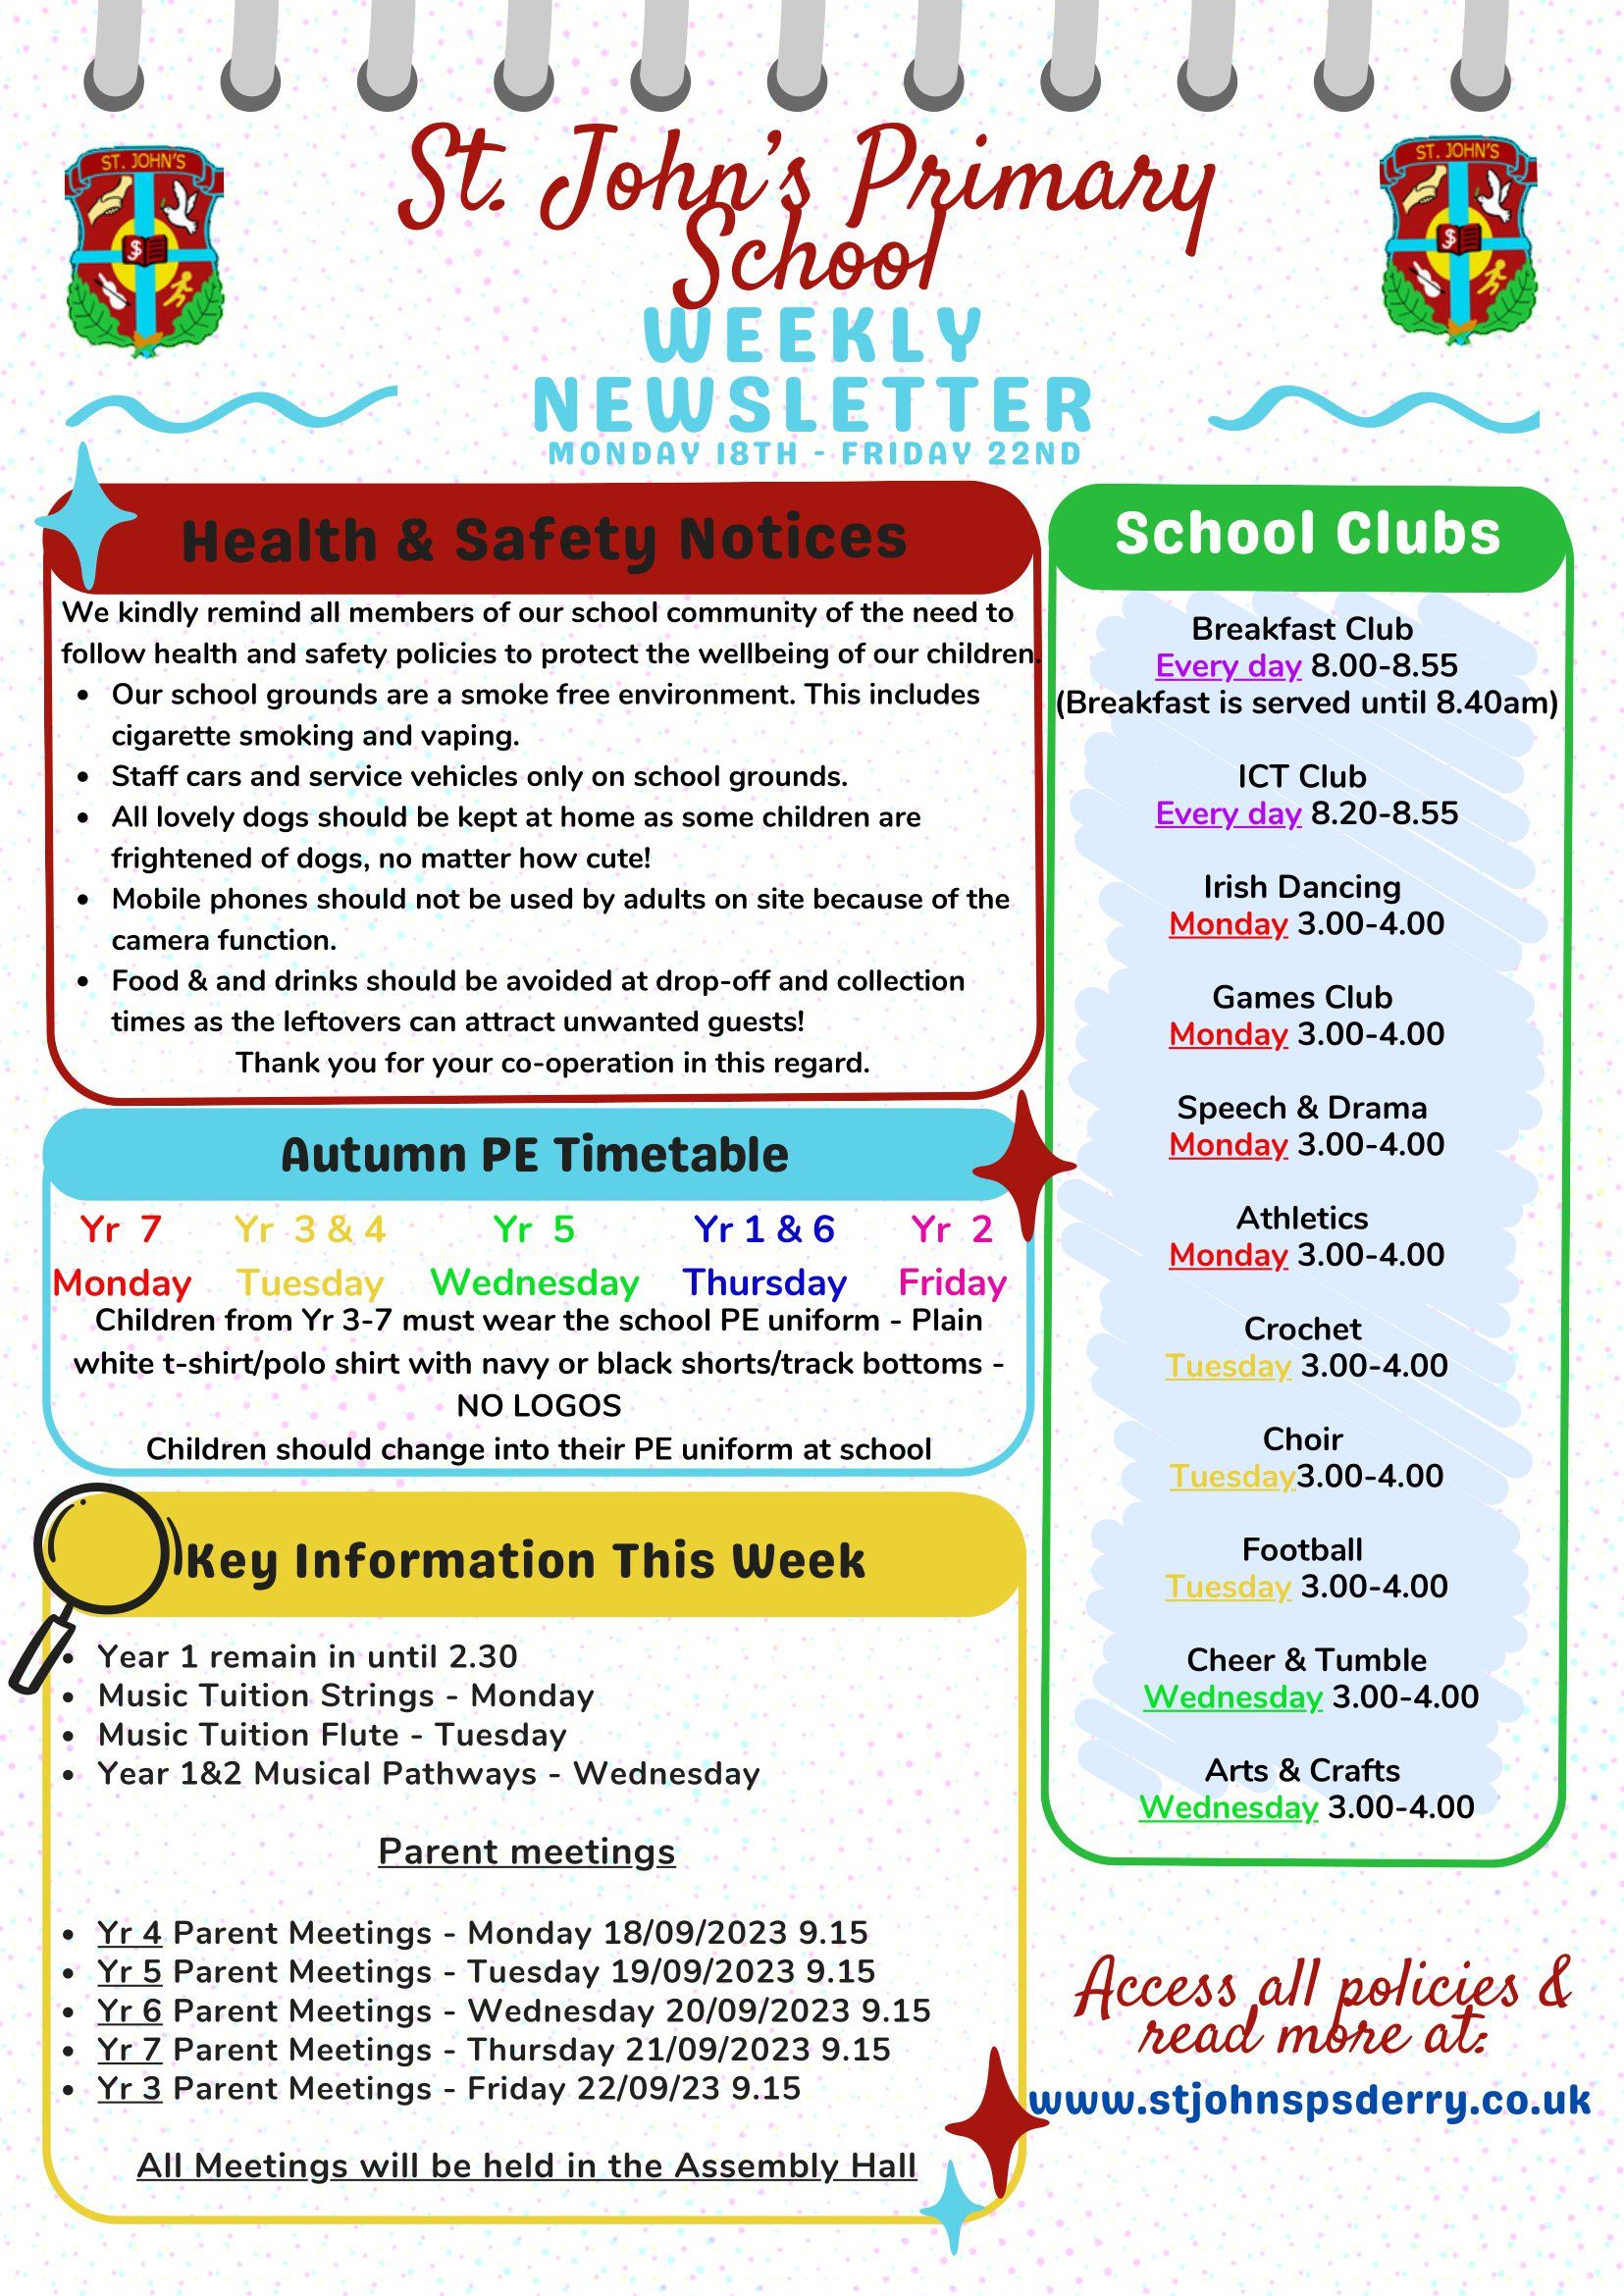 Weekly Newsletter 18/09/23